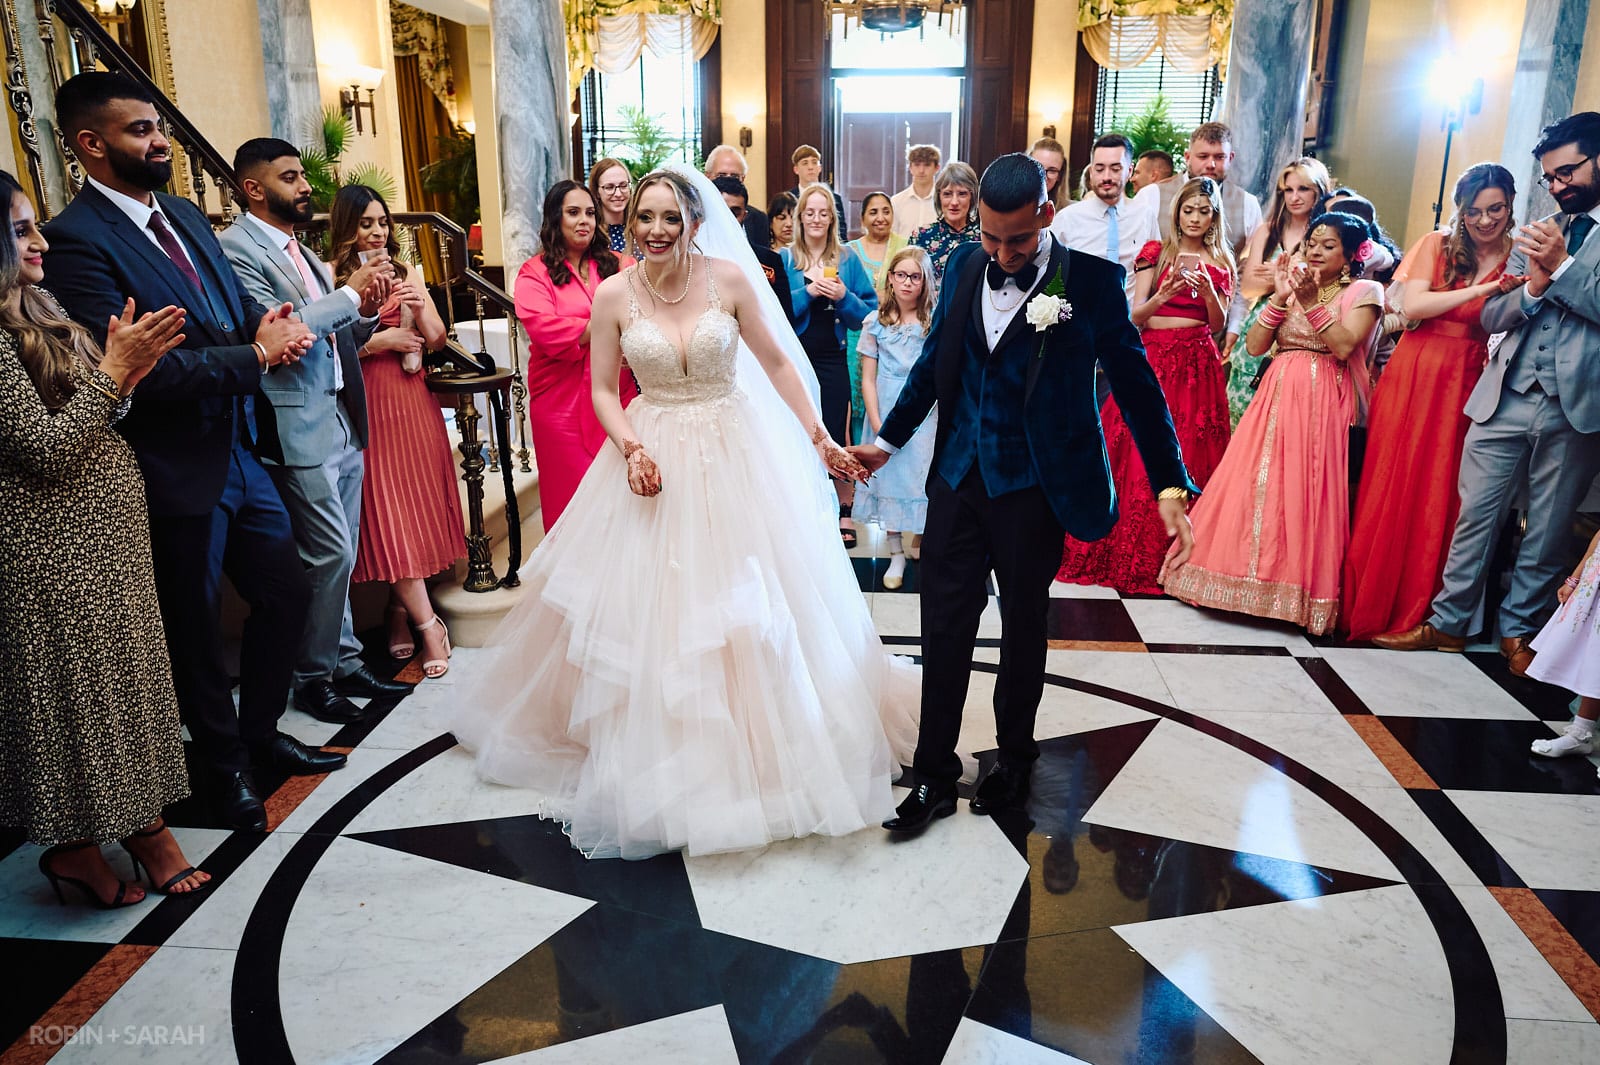 Bride and groom perform their first dance on marble floor at Spring Grove House